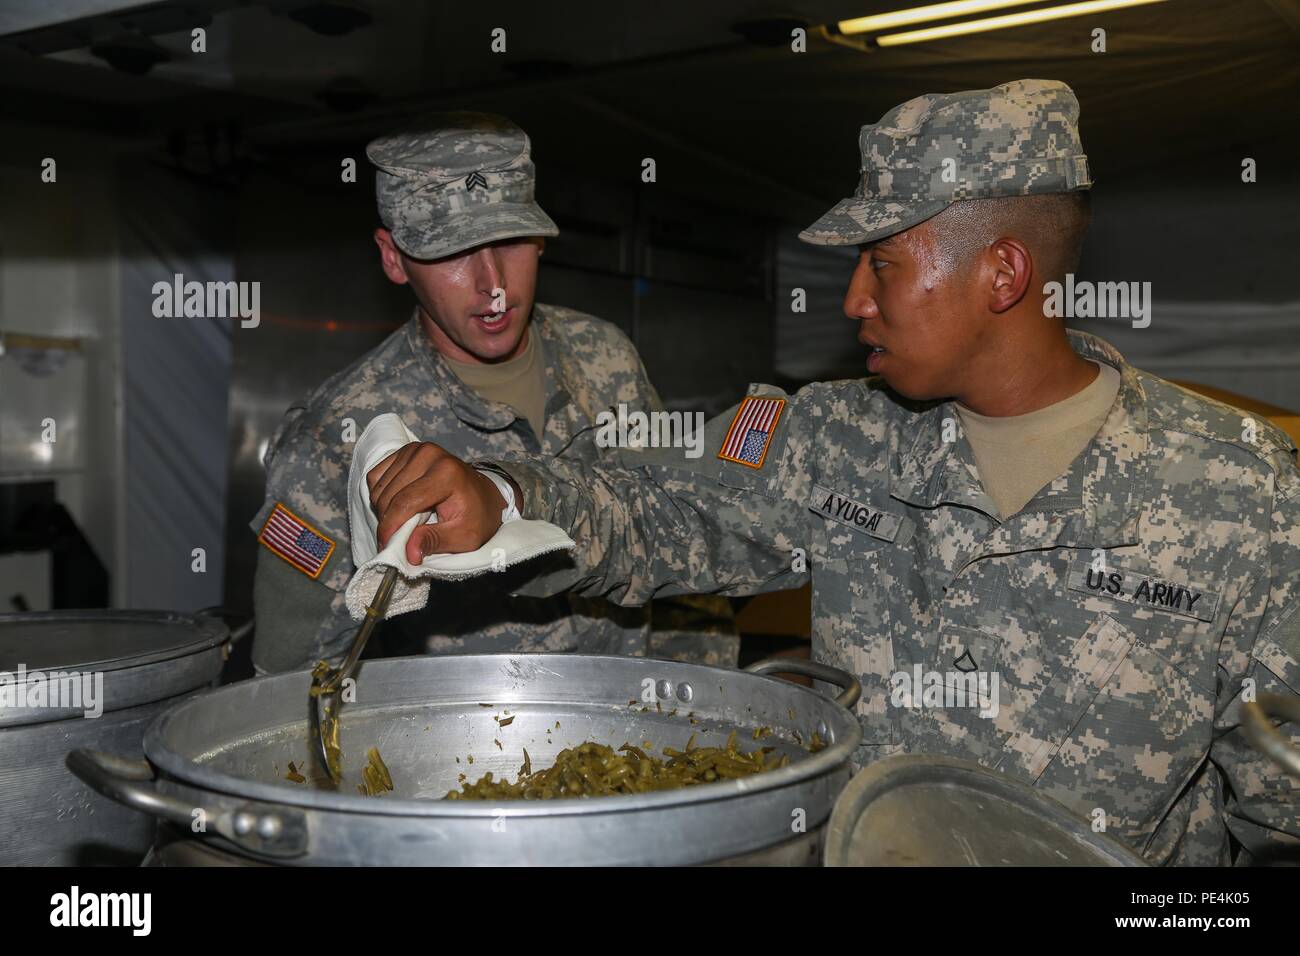 Sgt. Johnathan Valles, a food service specialist with Company F, 225th Brigade Support Battalion, 25th Infantry Division, coaches his Soldier, Pfc. Gerald Ayugat, on the proper way to prepare food Sept. 14 for over 500 Soldiers from 2 SBCT at East Range. A team of nine food specialists from Company F led by Staff Sgt. Derrick Lewellen prepare an evening meal for 2 SBCT Soldiers as well as train for their upcoming Field Conley Competition on Sept. 29. (U.S. Army photo by Sgt. Ian Ives, 2nd Stryker Brigade Combat Team Public Affairs/Released) Stock Photo